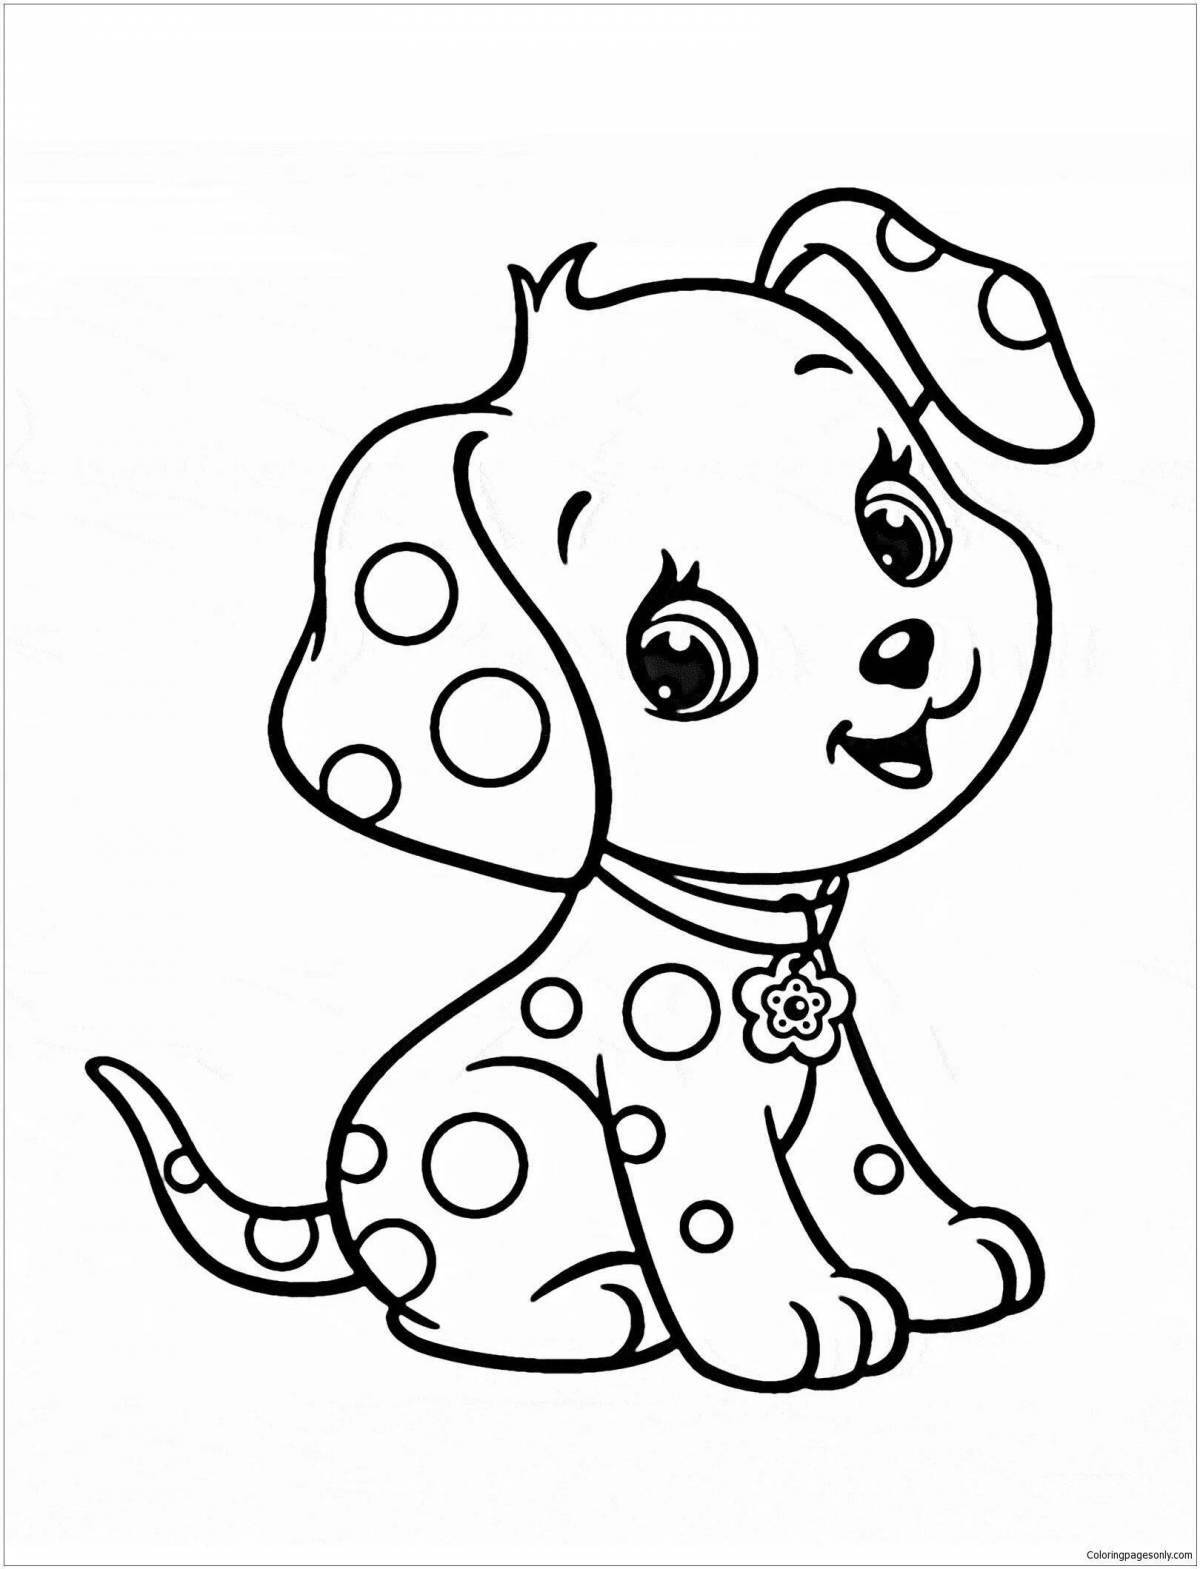 Coloring book busy puppy